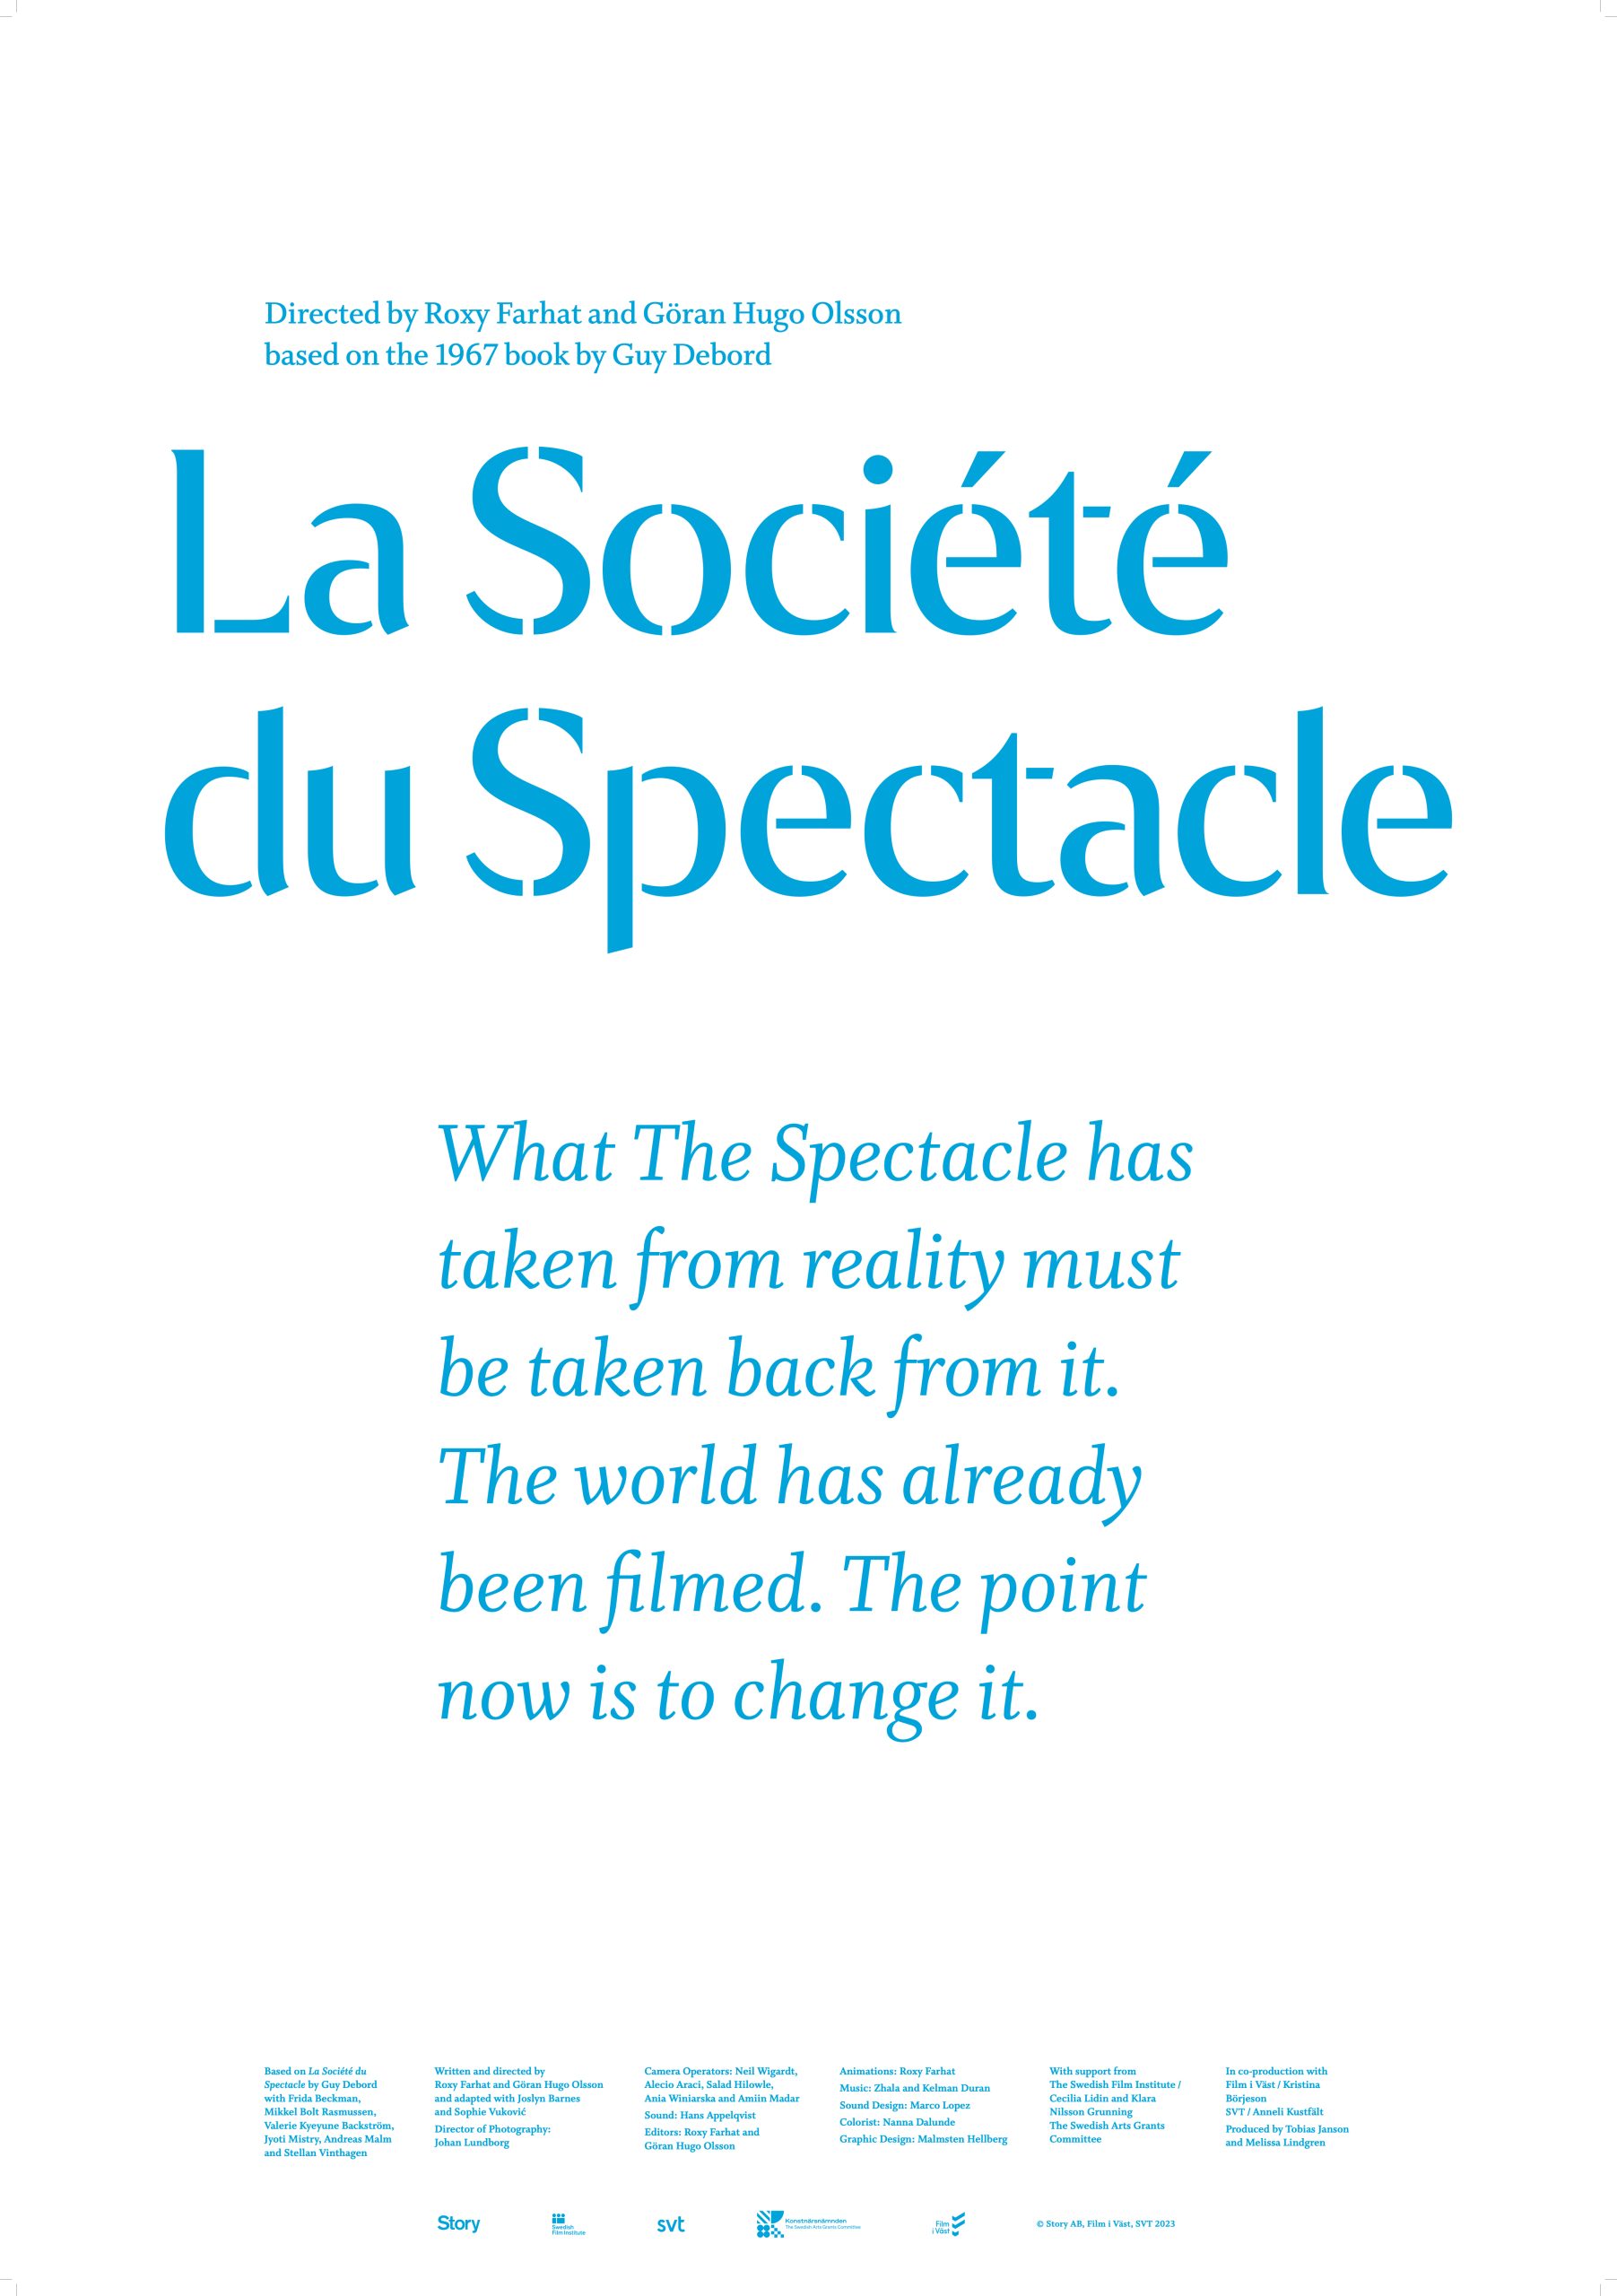 THE SOCIETY OF THE SPECTACLE